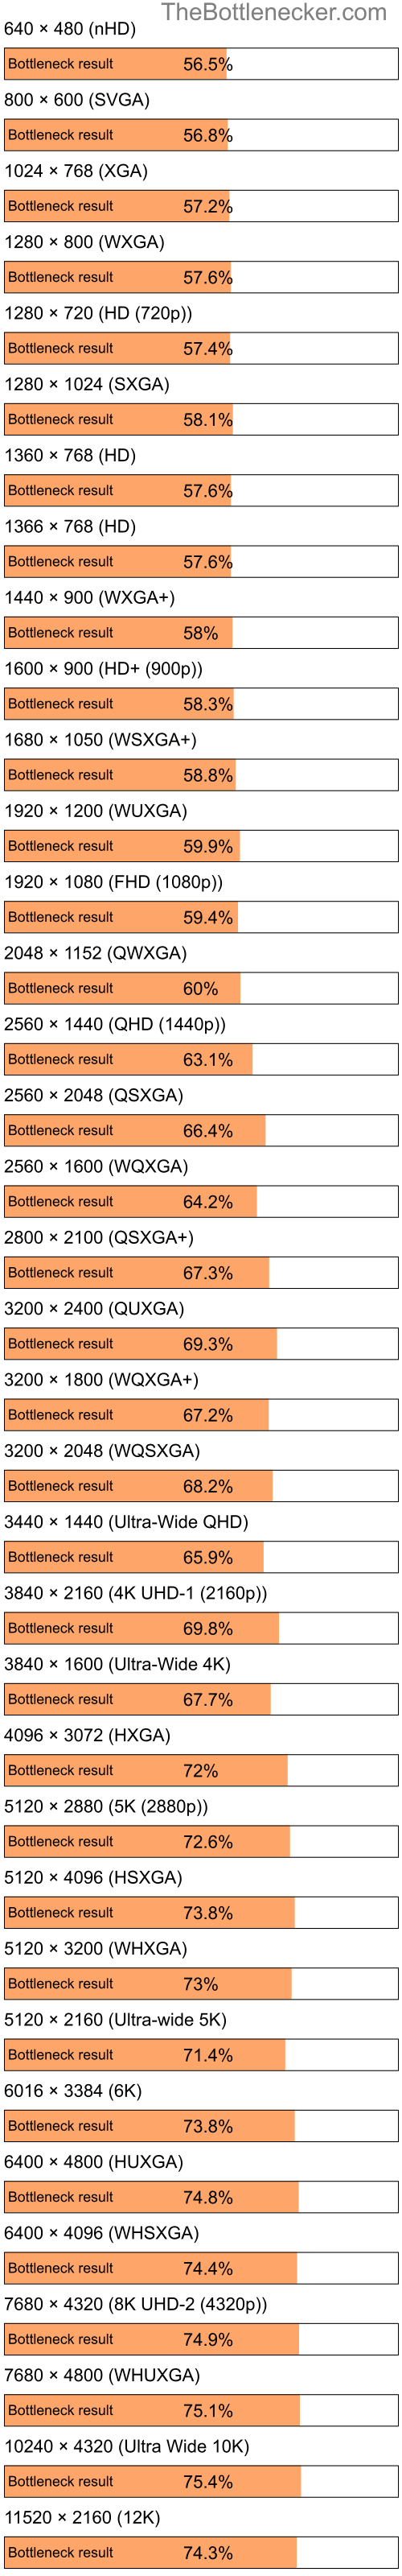 Bottleneck results by resolution for Intel Pentium 4 and NVIDIA Quadro FX 370 in Processor Intense Tasks